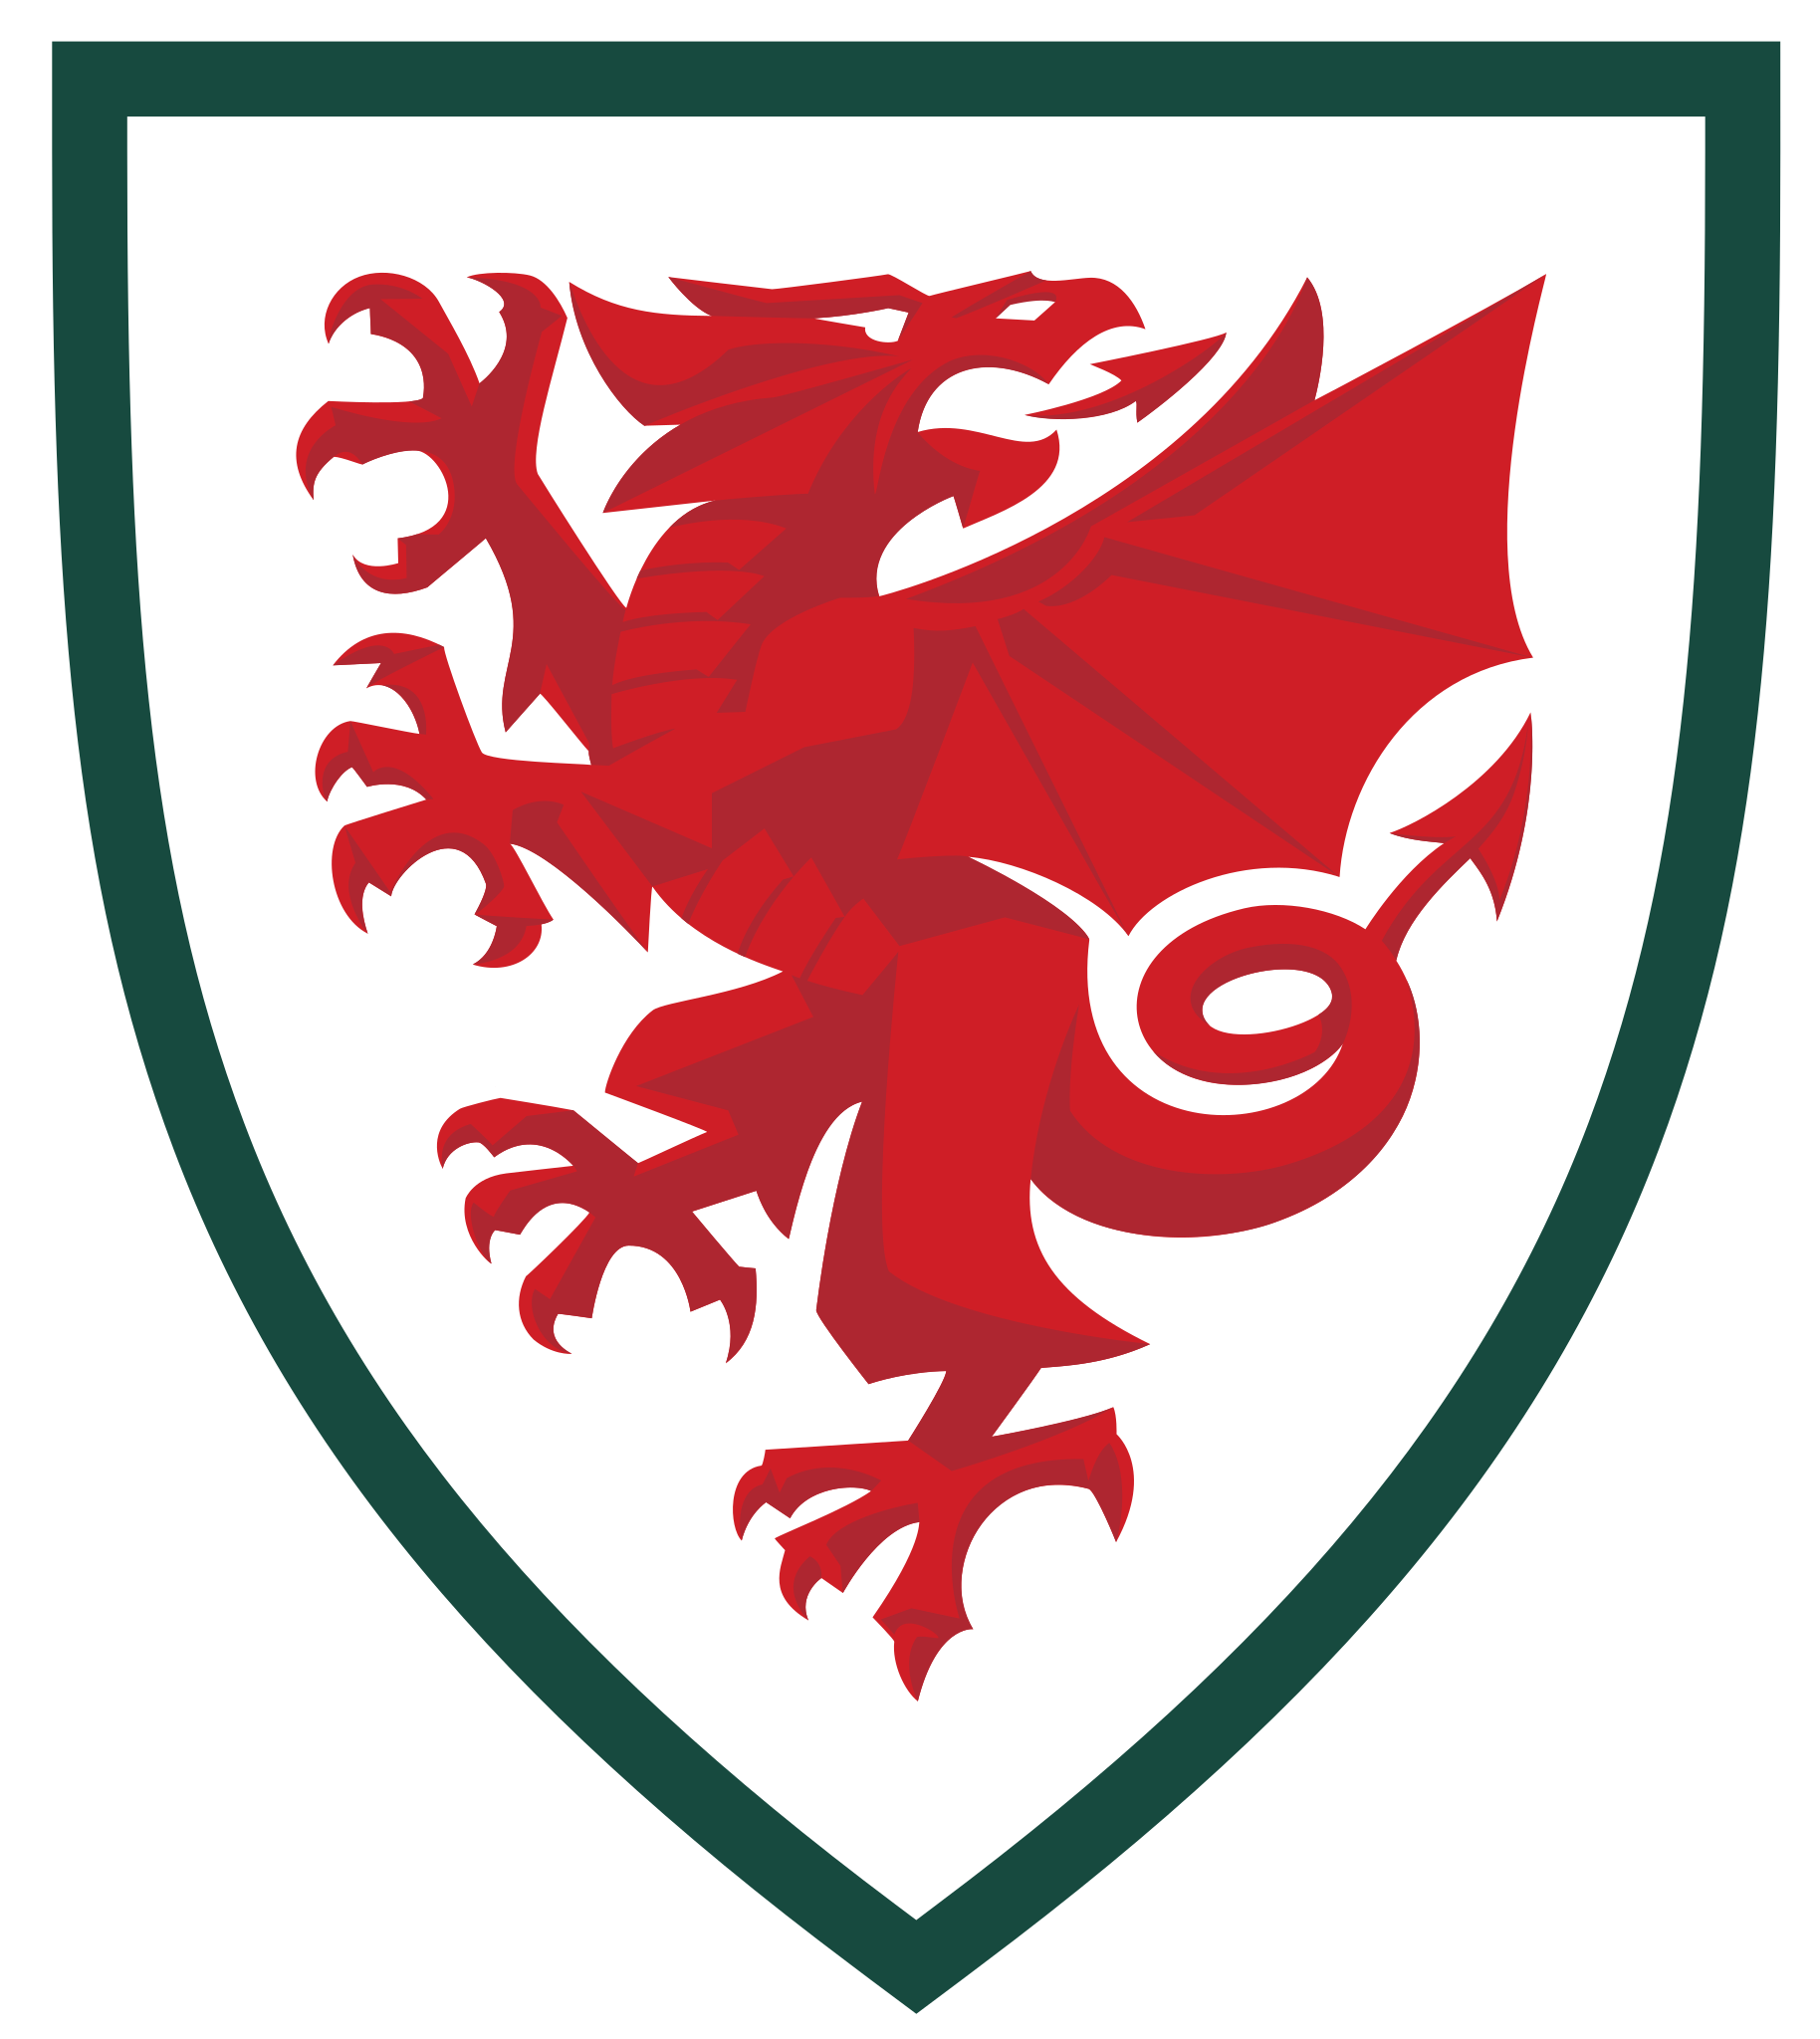 202211/Wales_svg.png